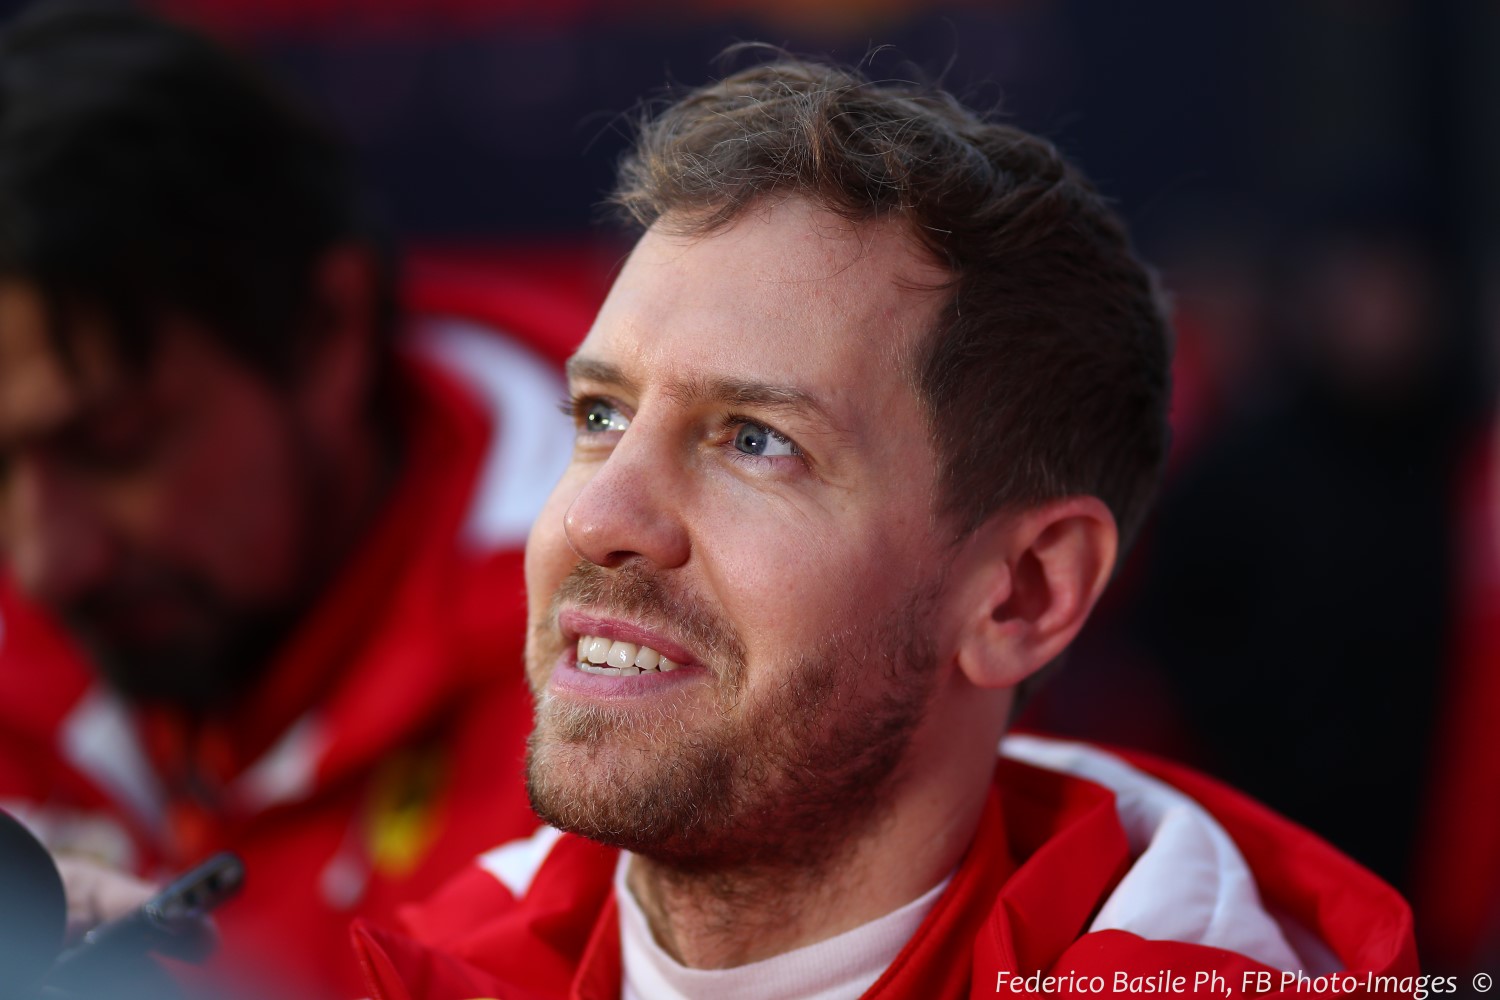 Does Vettel really think he can beat the Aldo Costa Mercedes?